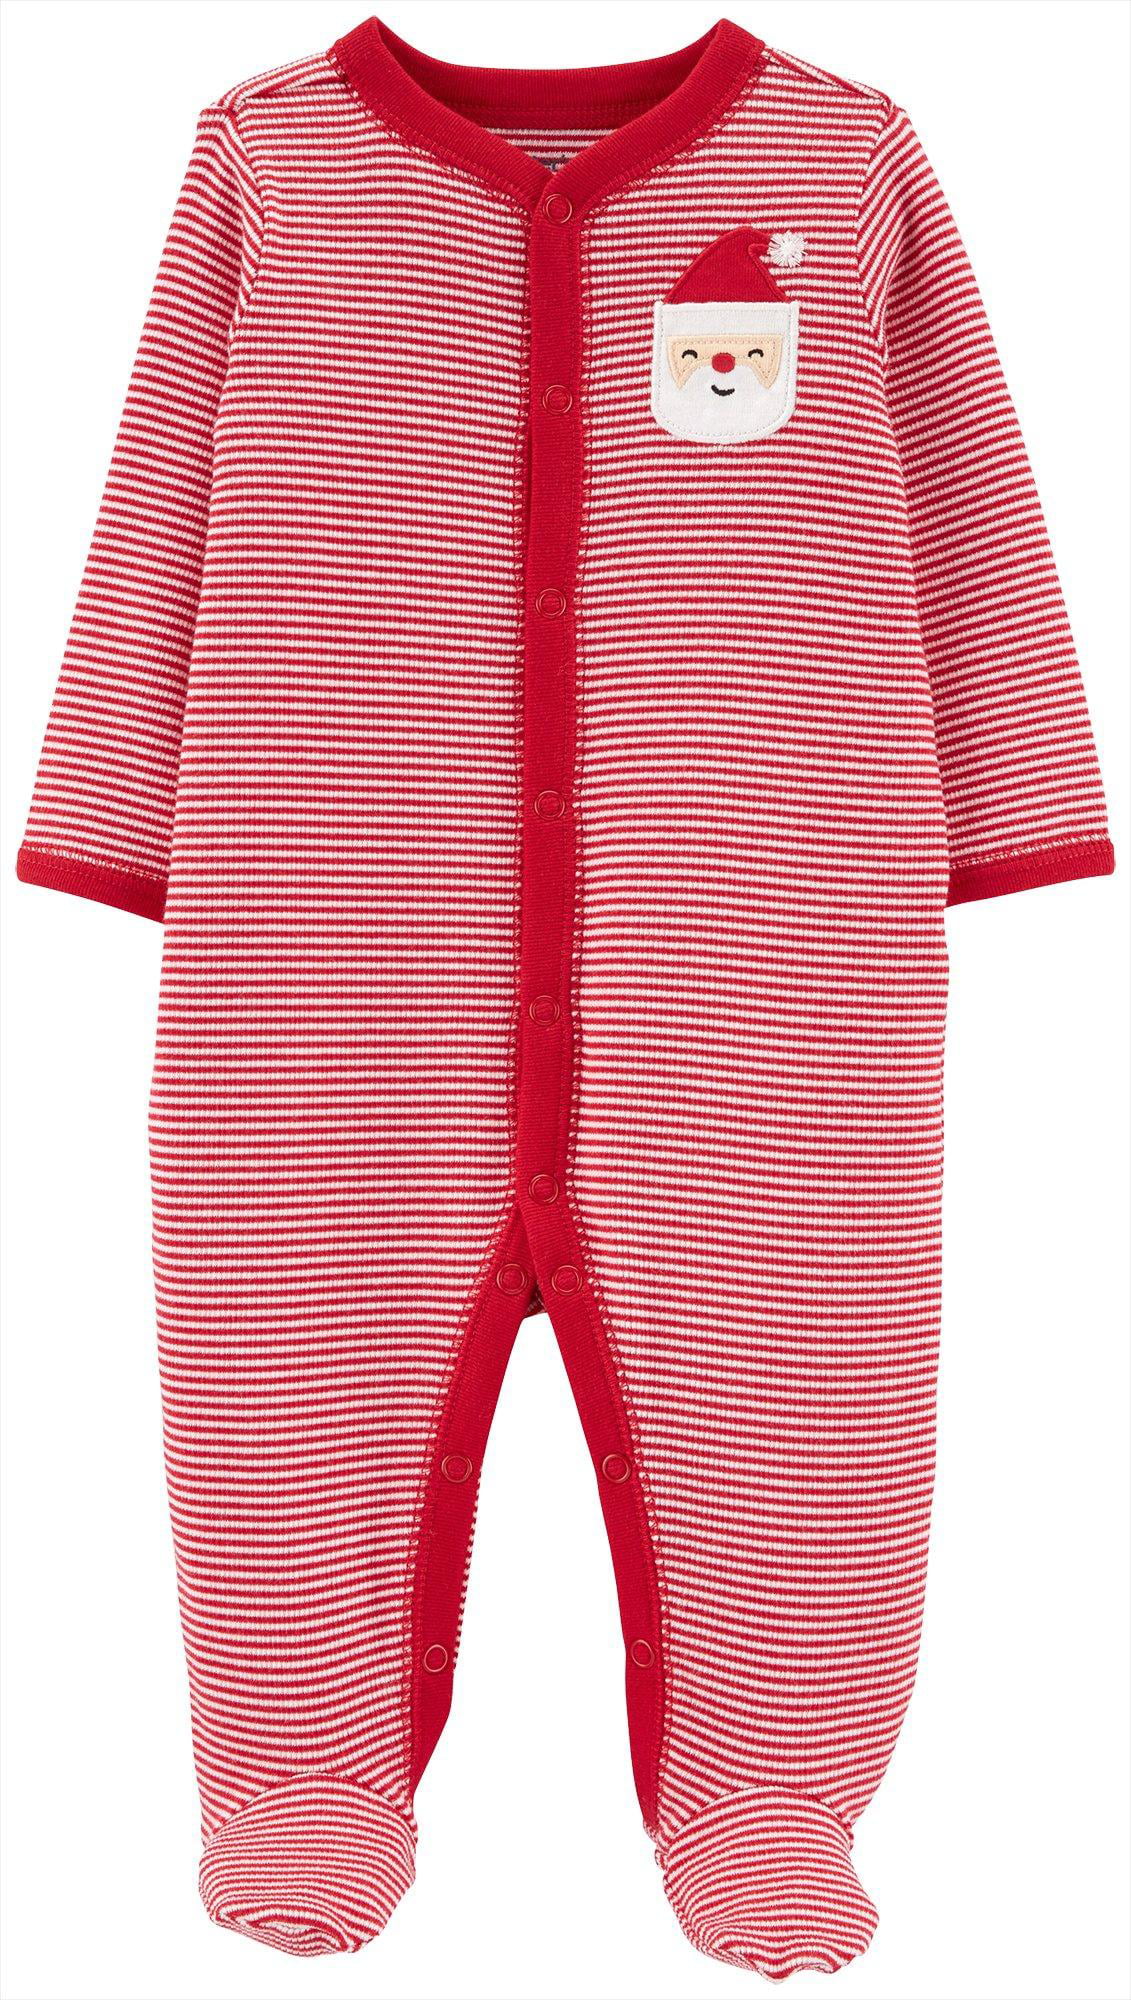 BOYS 6 MONTHS CARTER'S FOOTED SLEEPER SANTA HAT STRIPED CHRISTMAS PAJAMAS #16324 